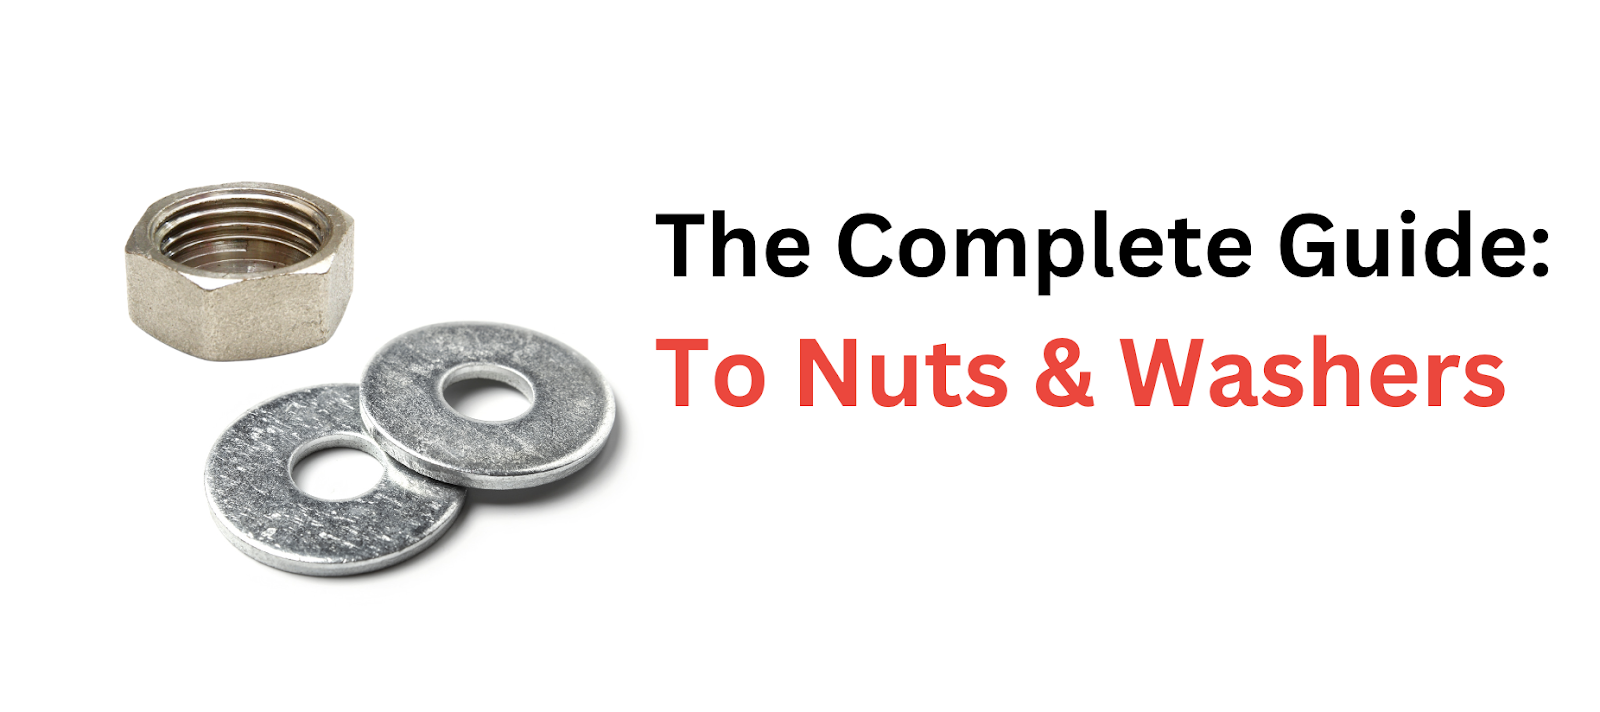 Nuts & Washers Guide